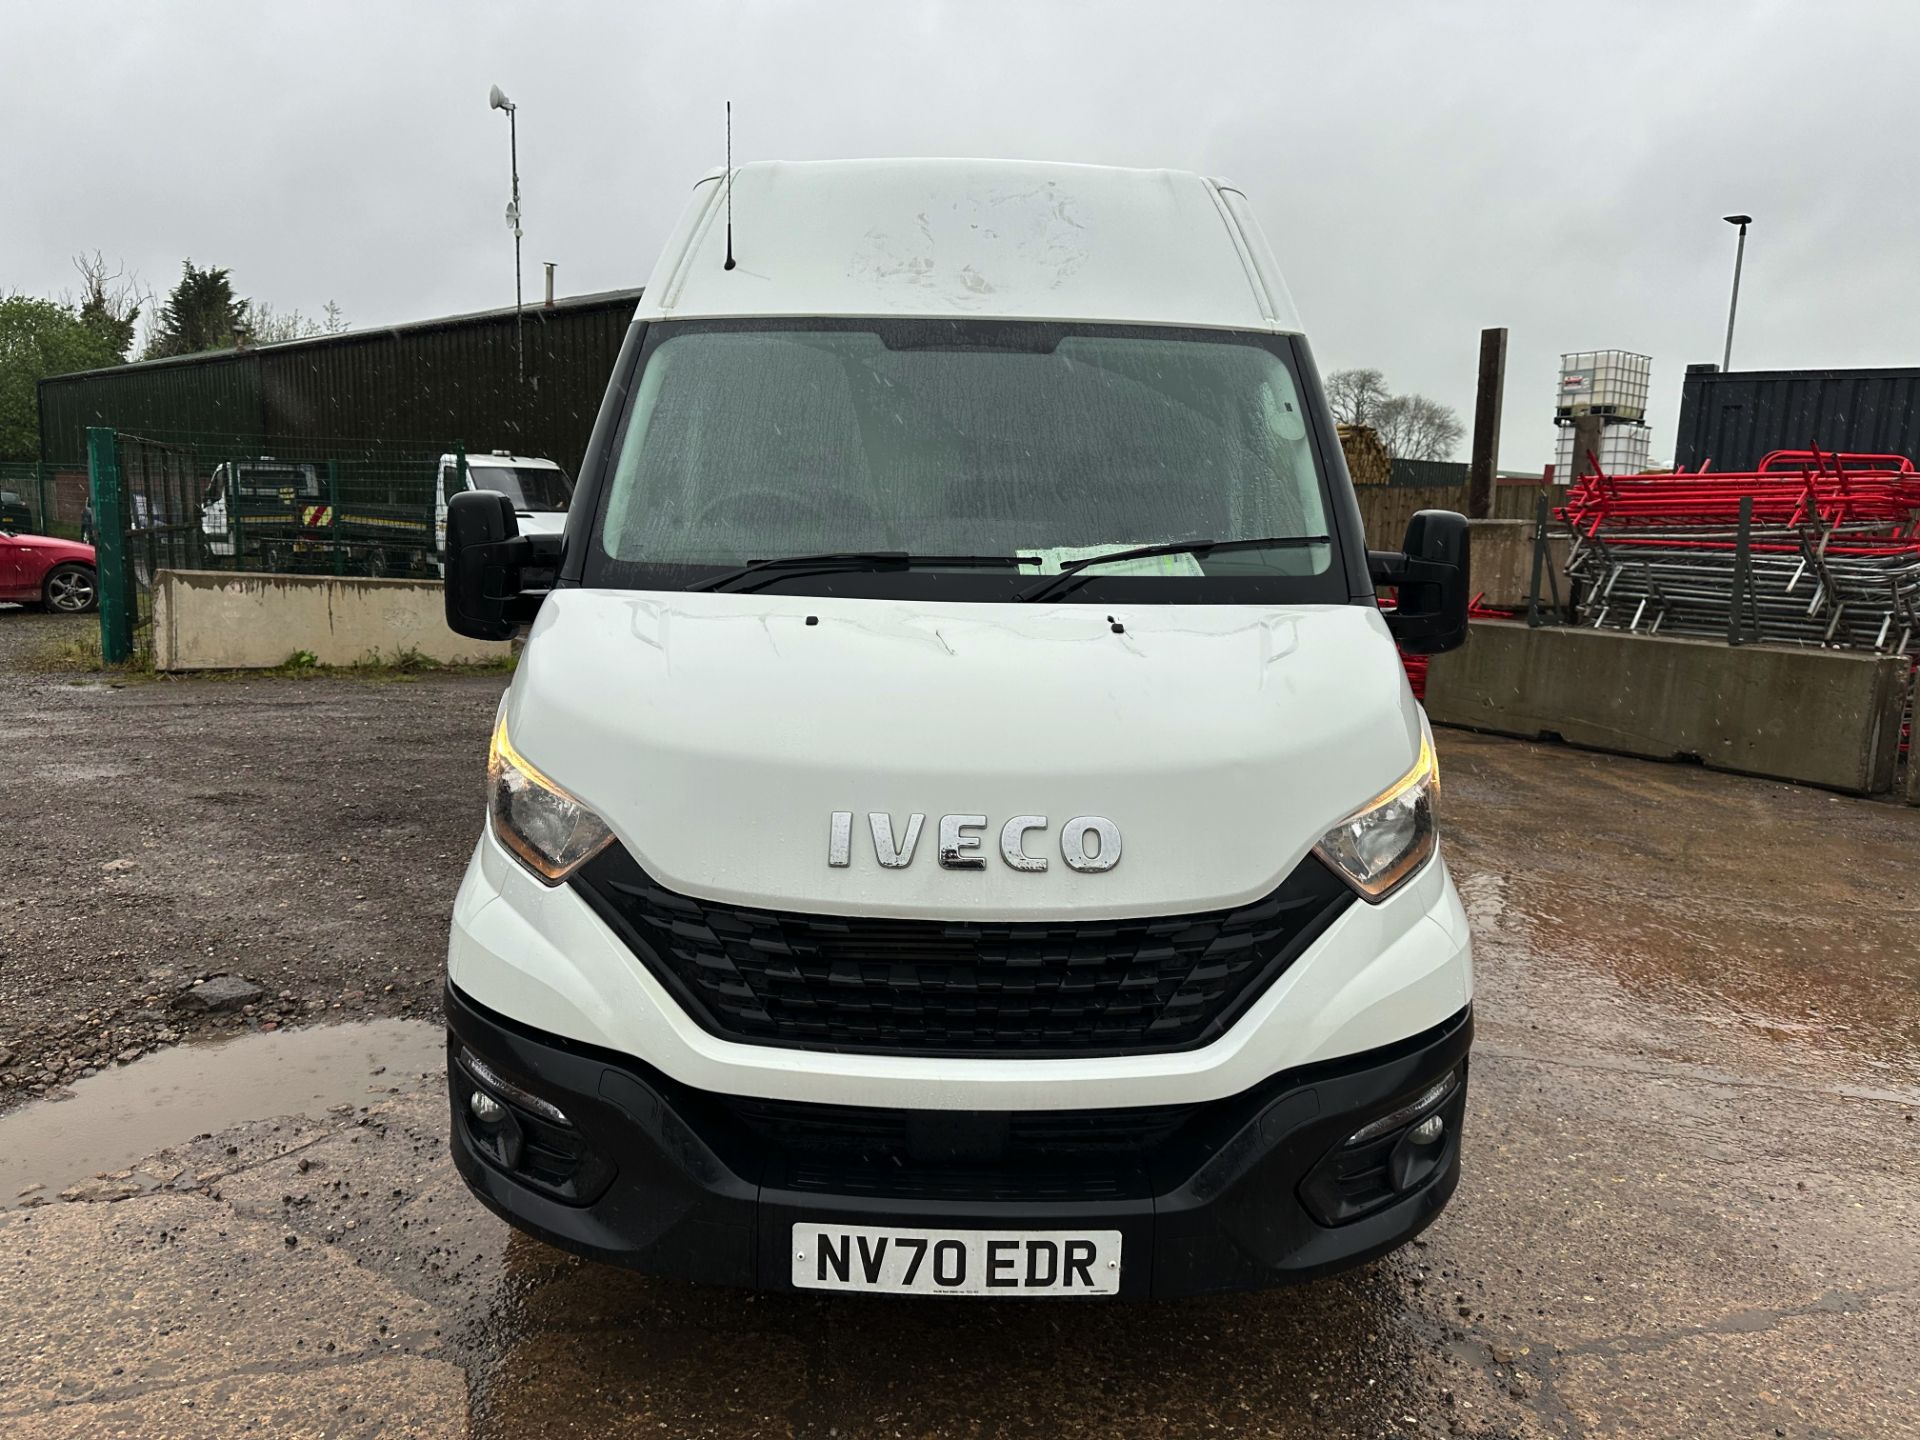 Iveco Daily 35-140 Long Wheel Base High Roof - 2021 Reg (New Shape) Only 85K Miles - Air Con - Look! - Image 3 of 27